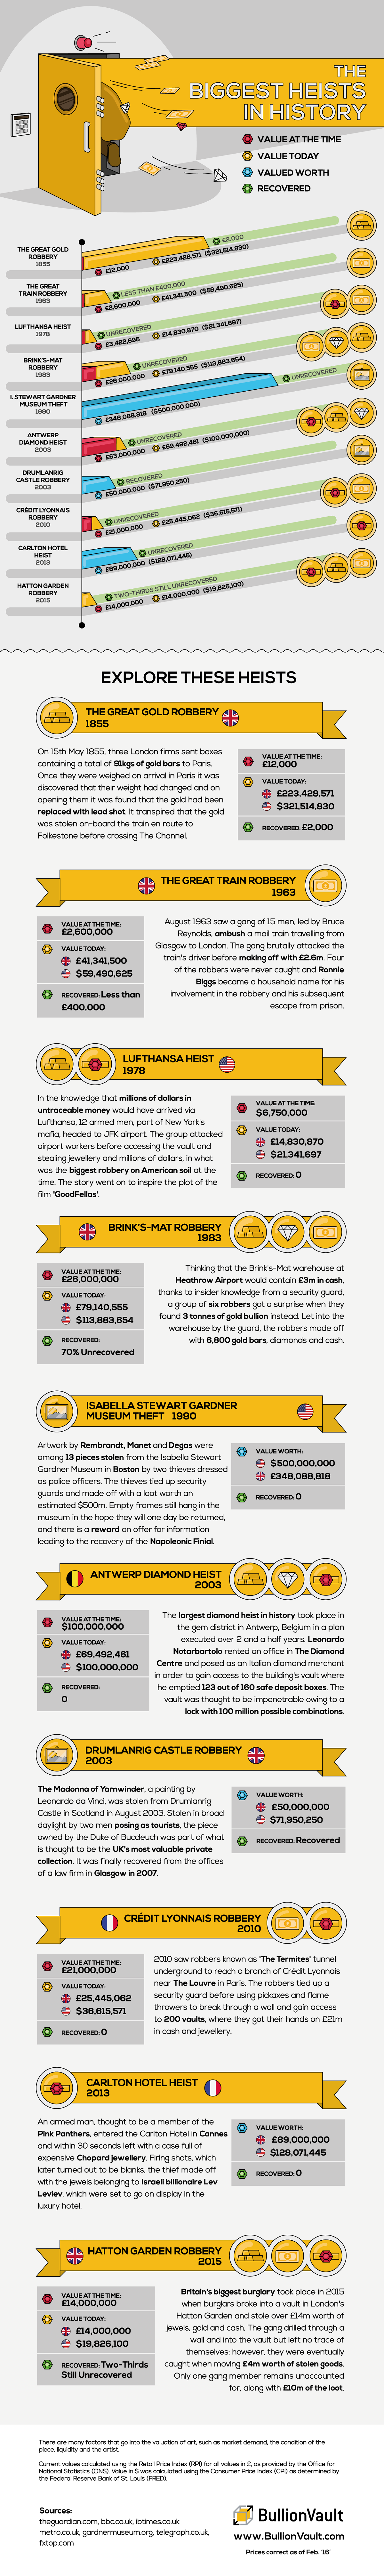 The Biggest Heists in History #Infographic